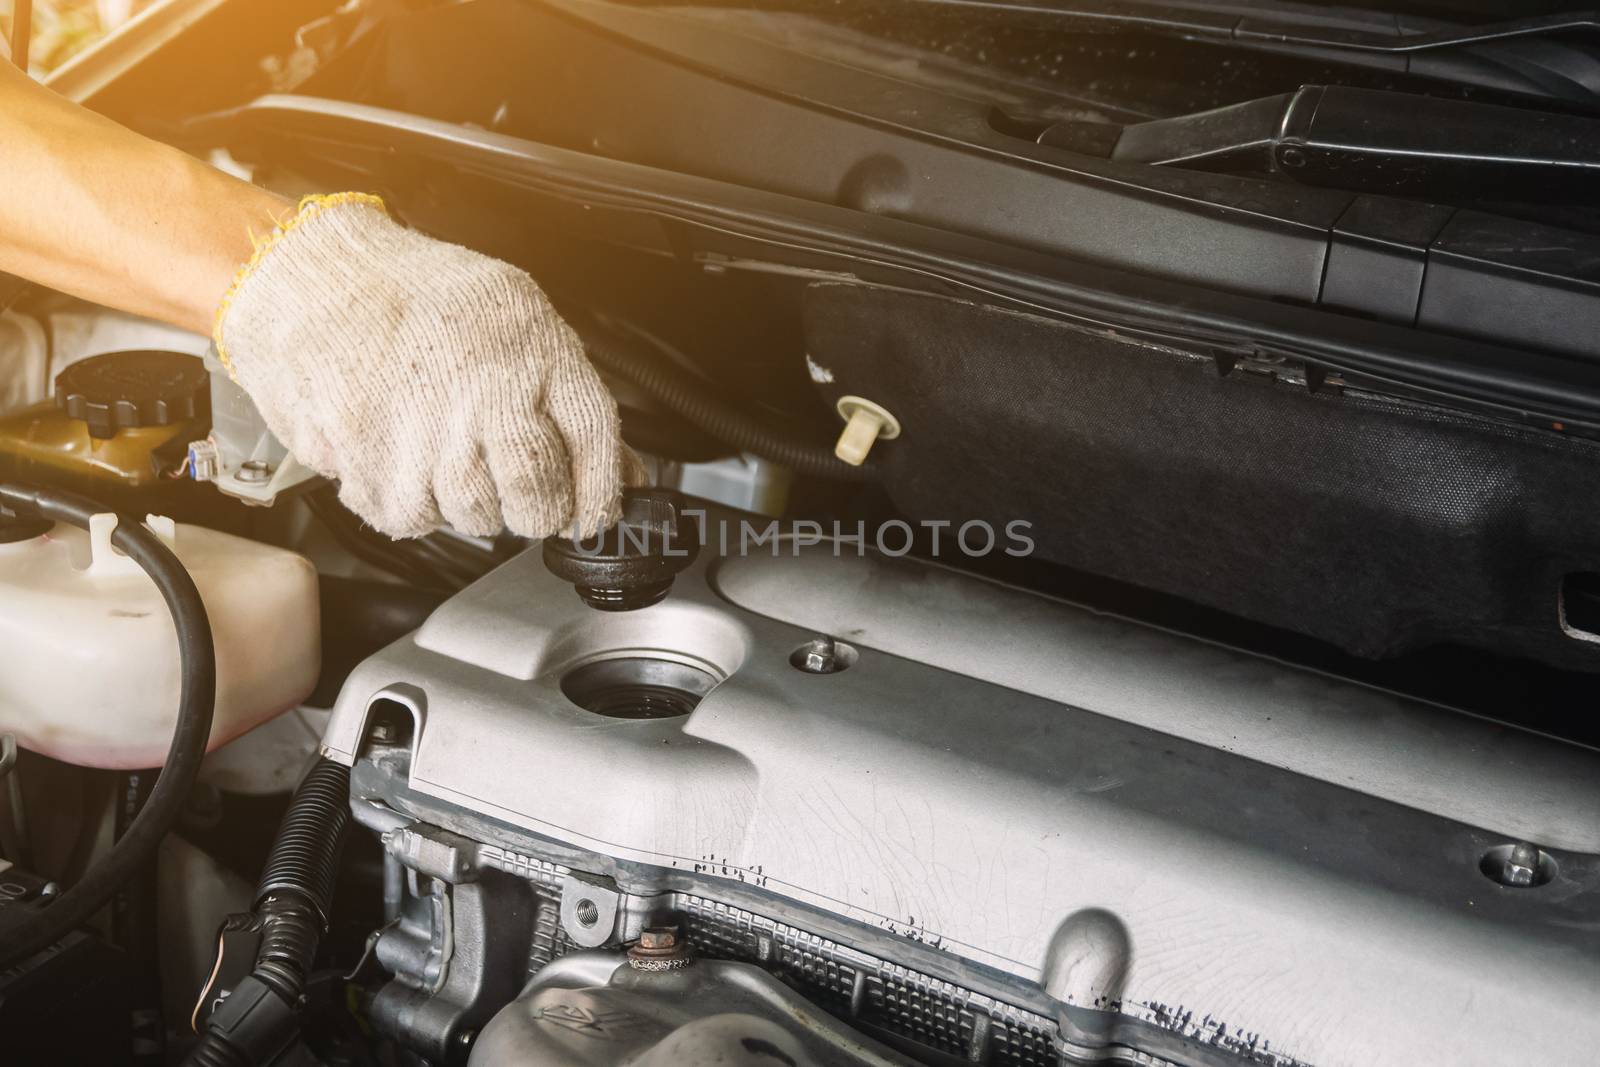 Auto mechanic Repair maintenance Check engine oil level and car inspection